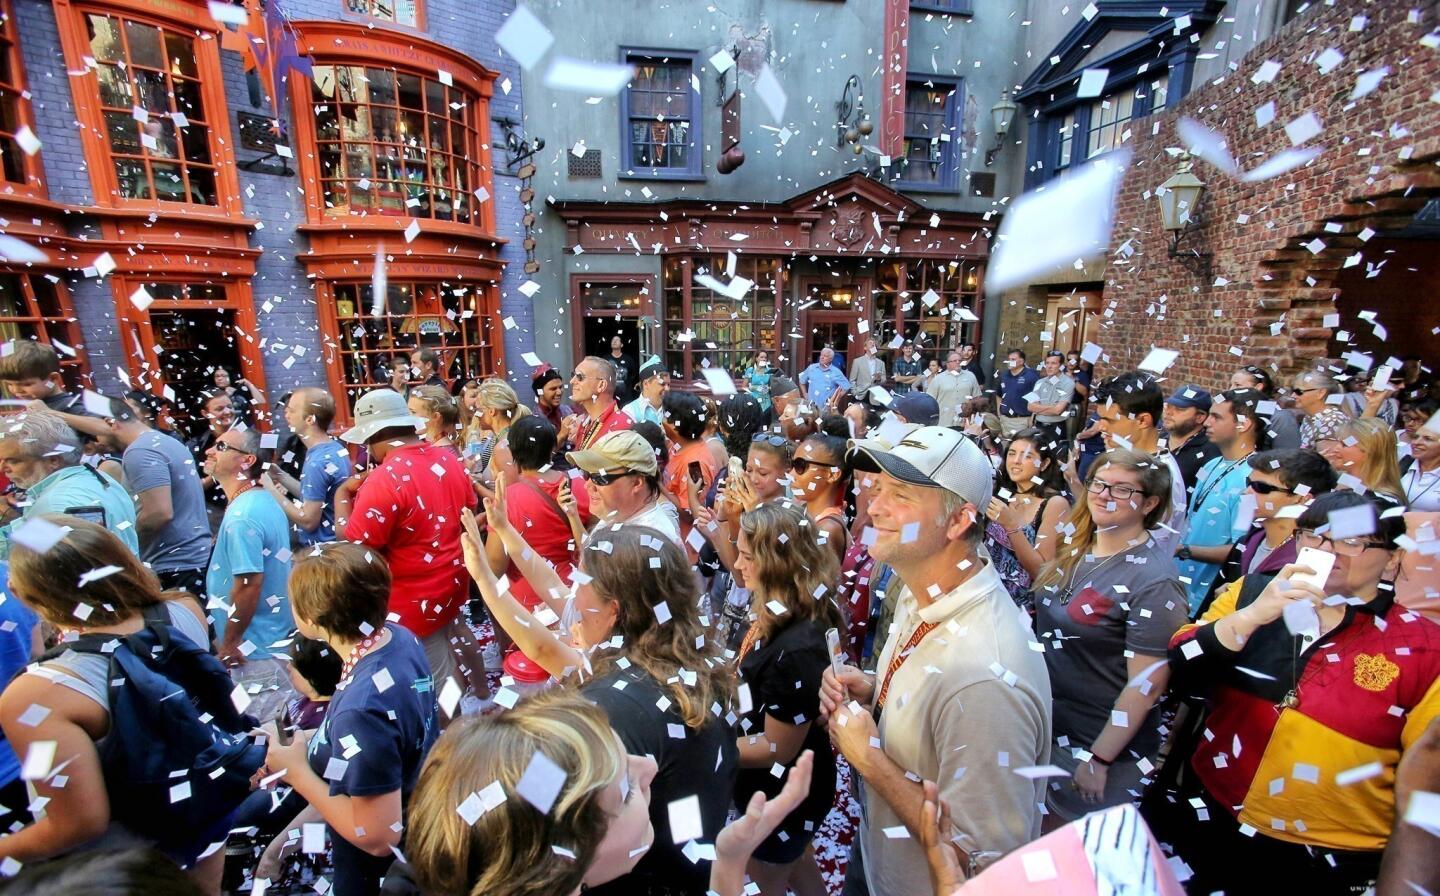 DIAGON ALLEY GRAND OPENING